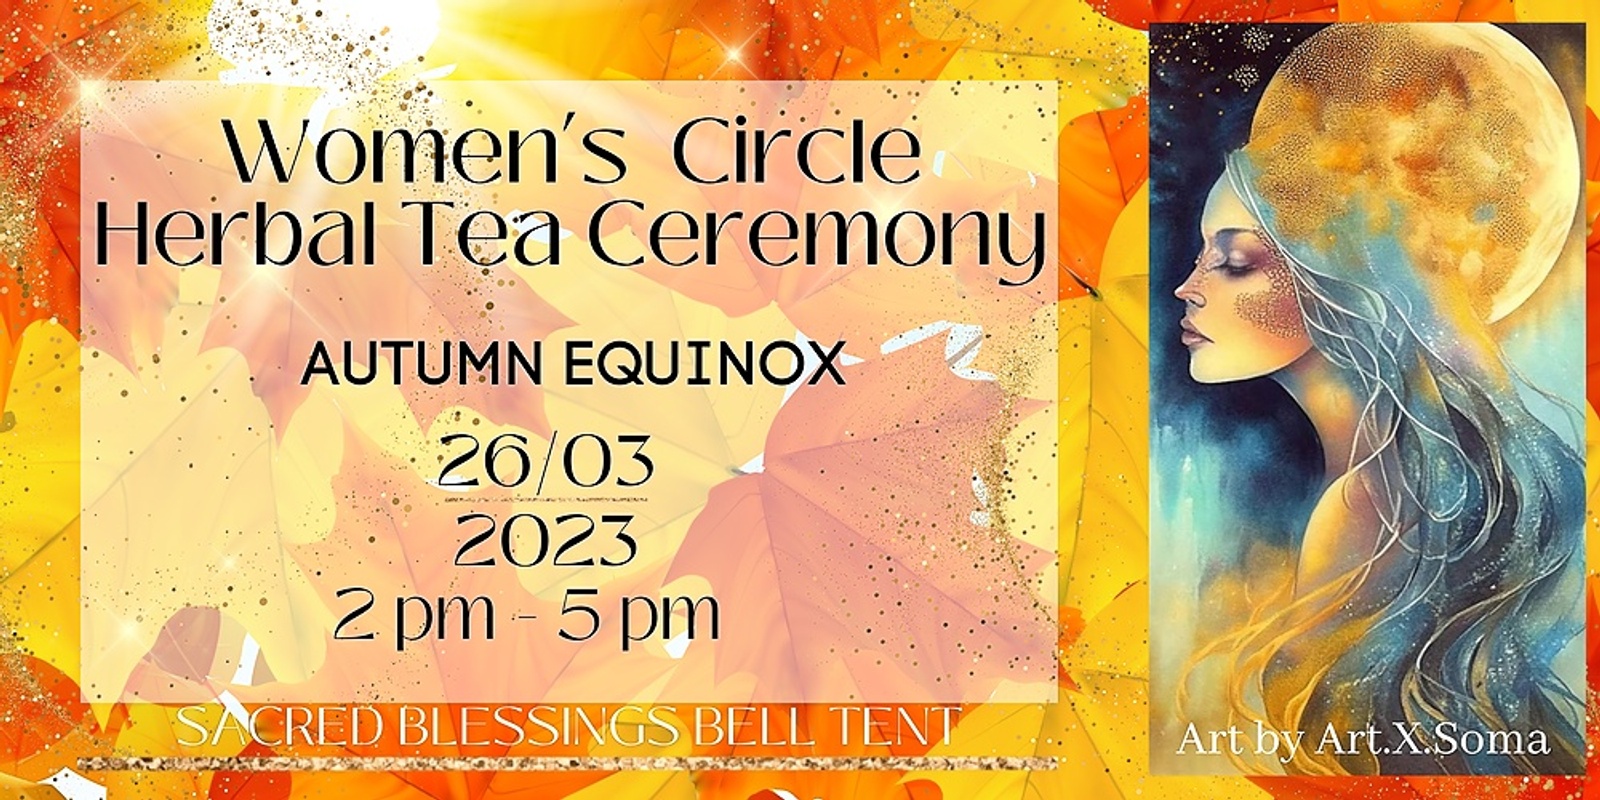 Womens Circle Herbal Tea Ceremony - Sacred Blessings Bell Tent  - Sunday 26th March 2pm - 5pm 